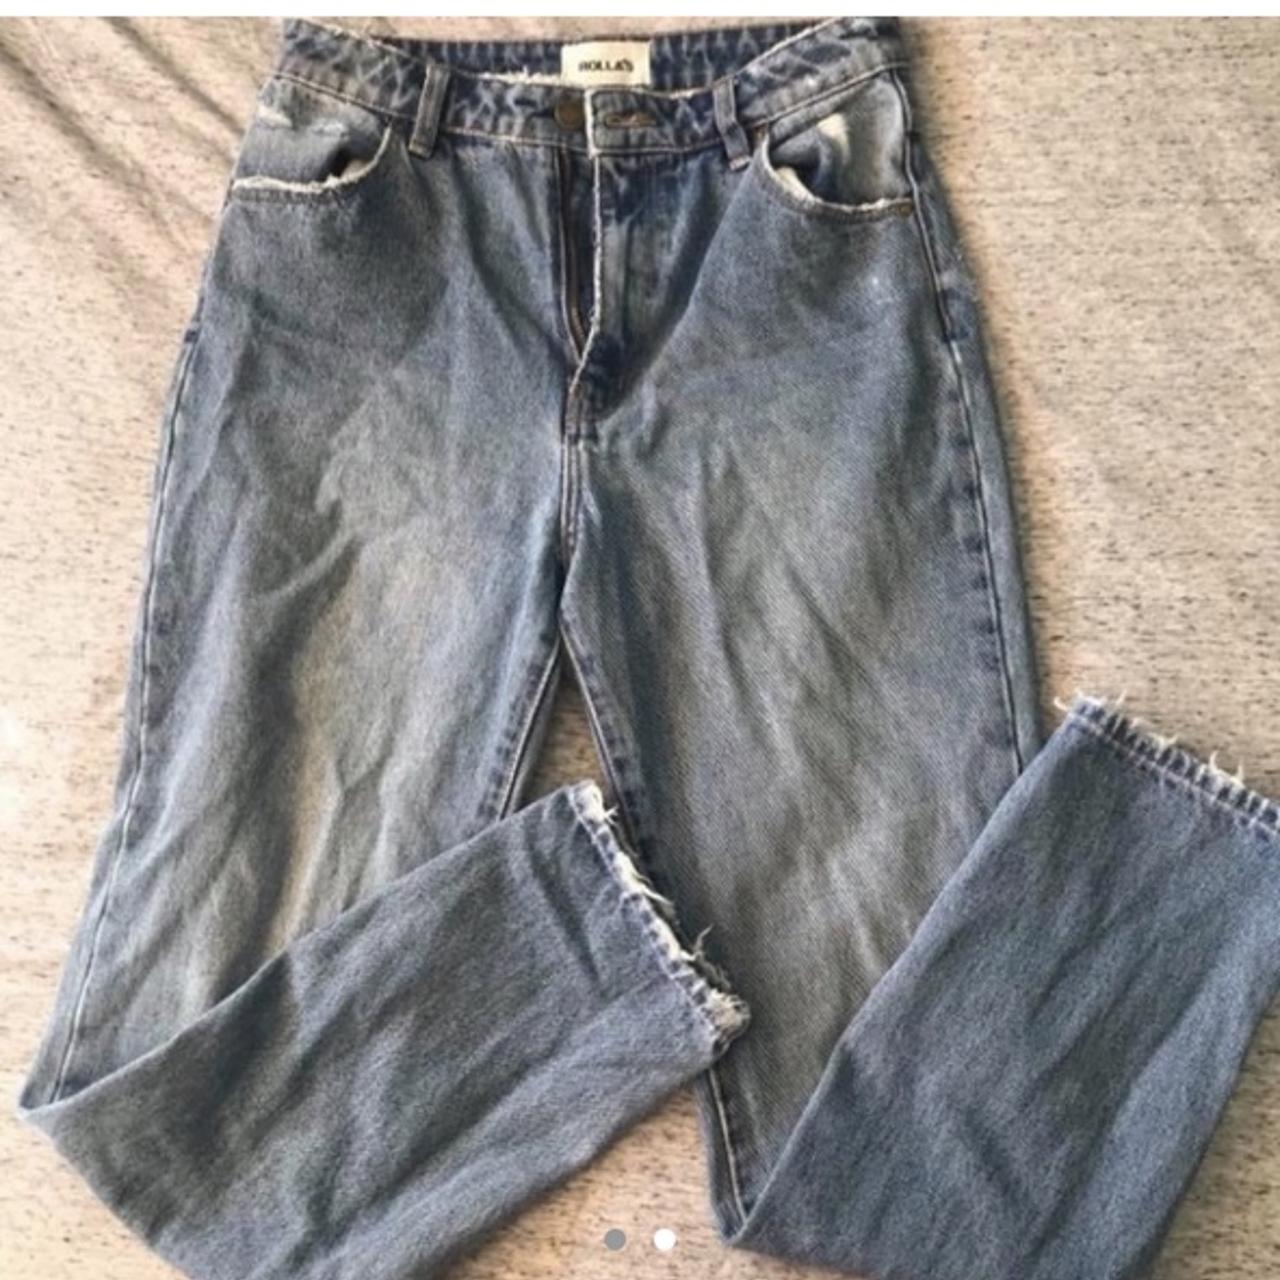 Rollas Jeans worn but in it perfect condition RRP -... - Depop